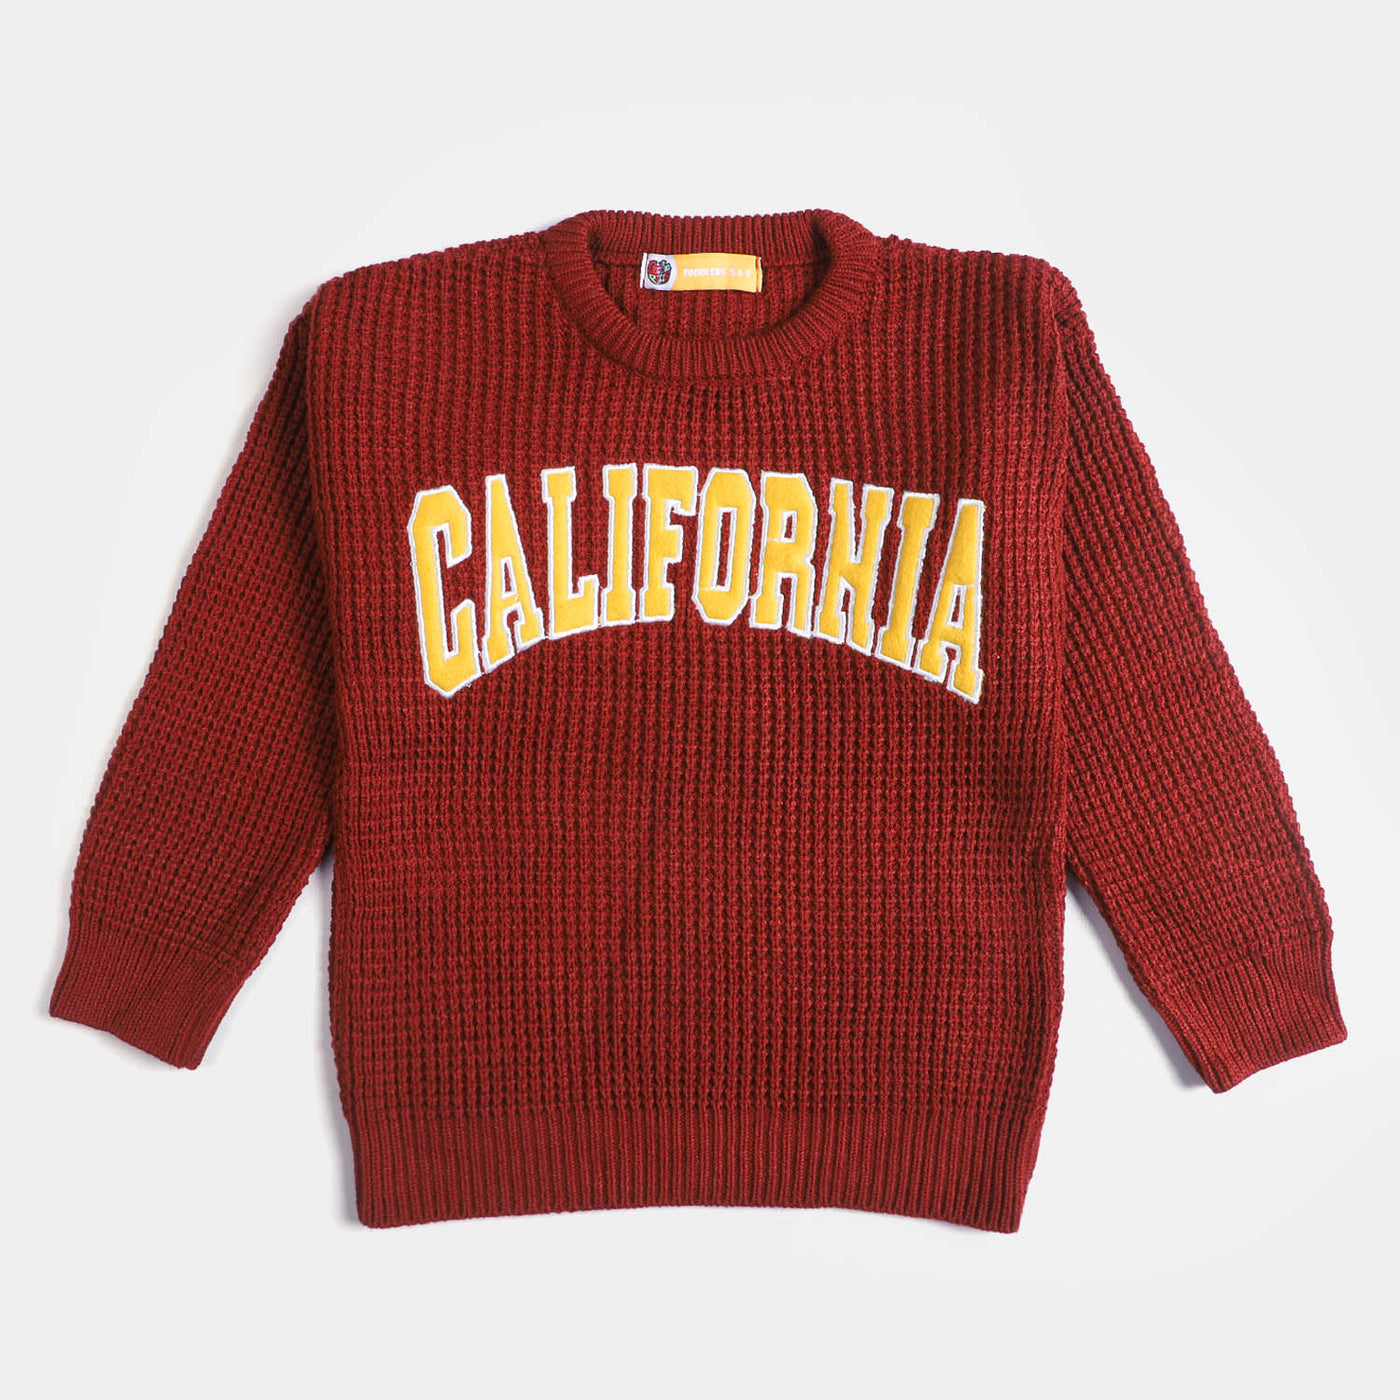 Boys Sweater BS-001-Red